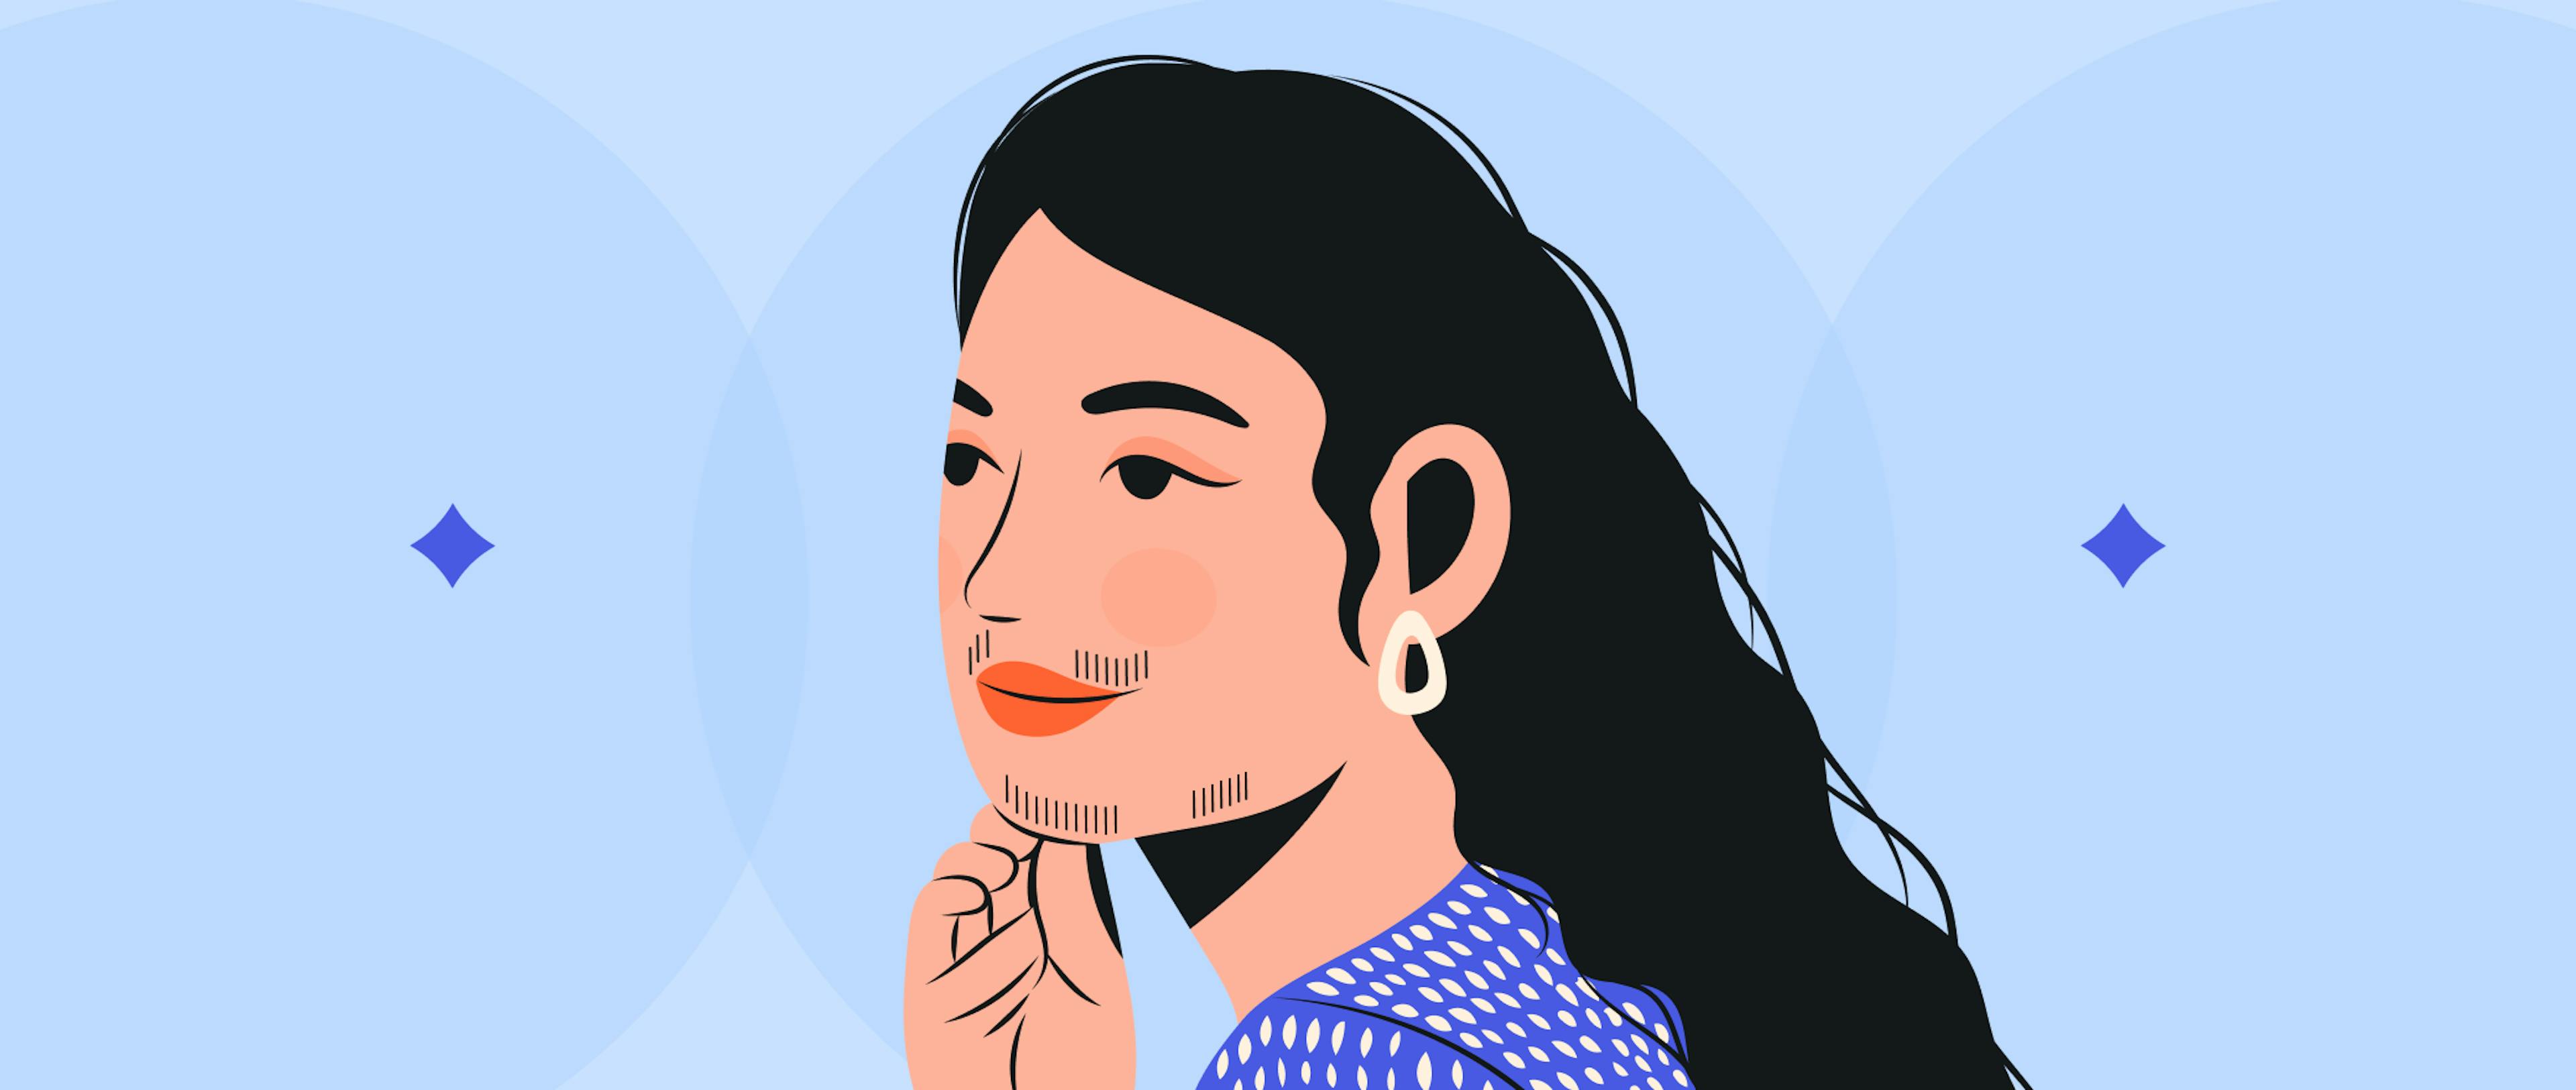 An illustration representing a woman with an unusual amount of facial hair.